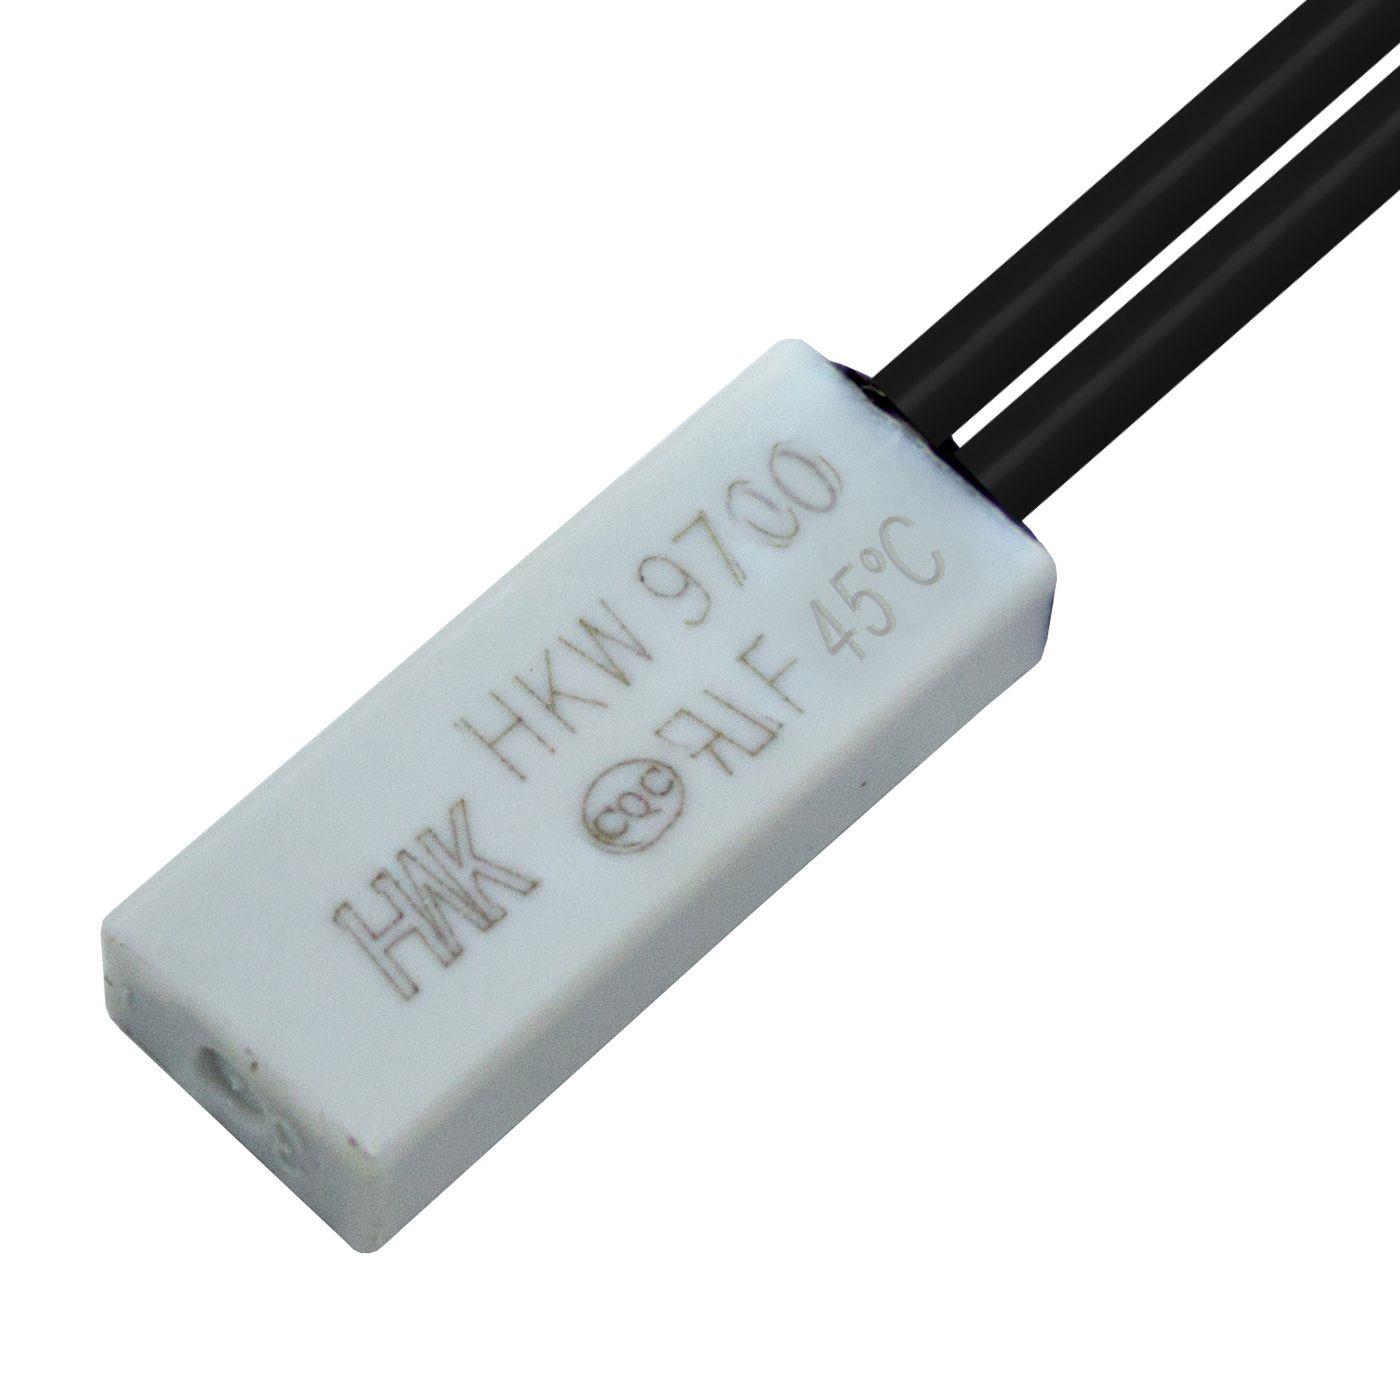 Thermal switch 45°C NO contact 250V 5A Cable Temperature switch thermostat Bimetal Thermal protection